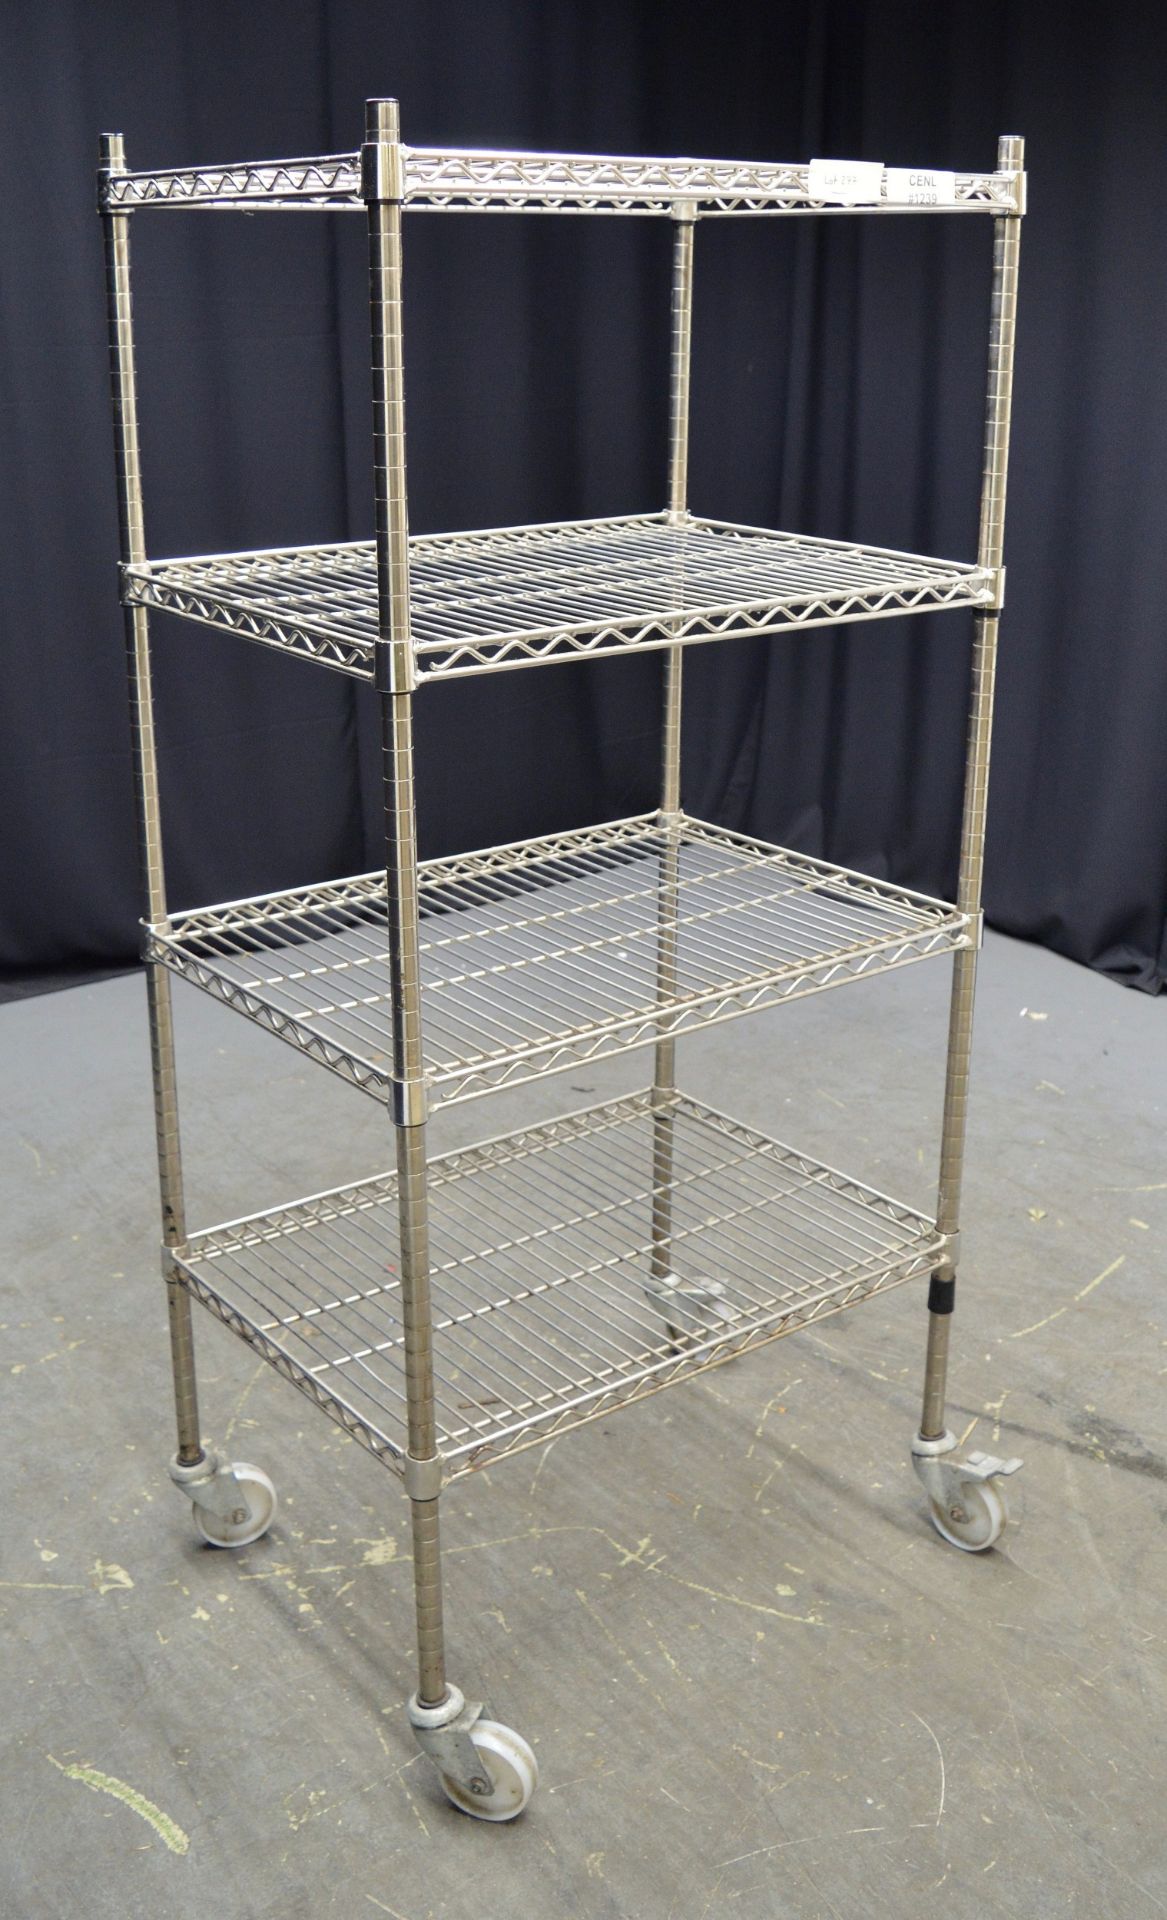 Stainless Steel 4 Tier Shelving Unit on Wheels - L745 x W540 x H1600mm - Image 2 of 3